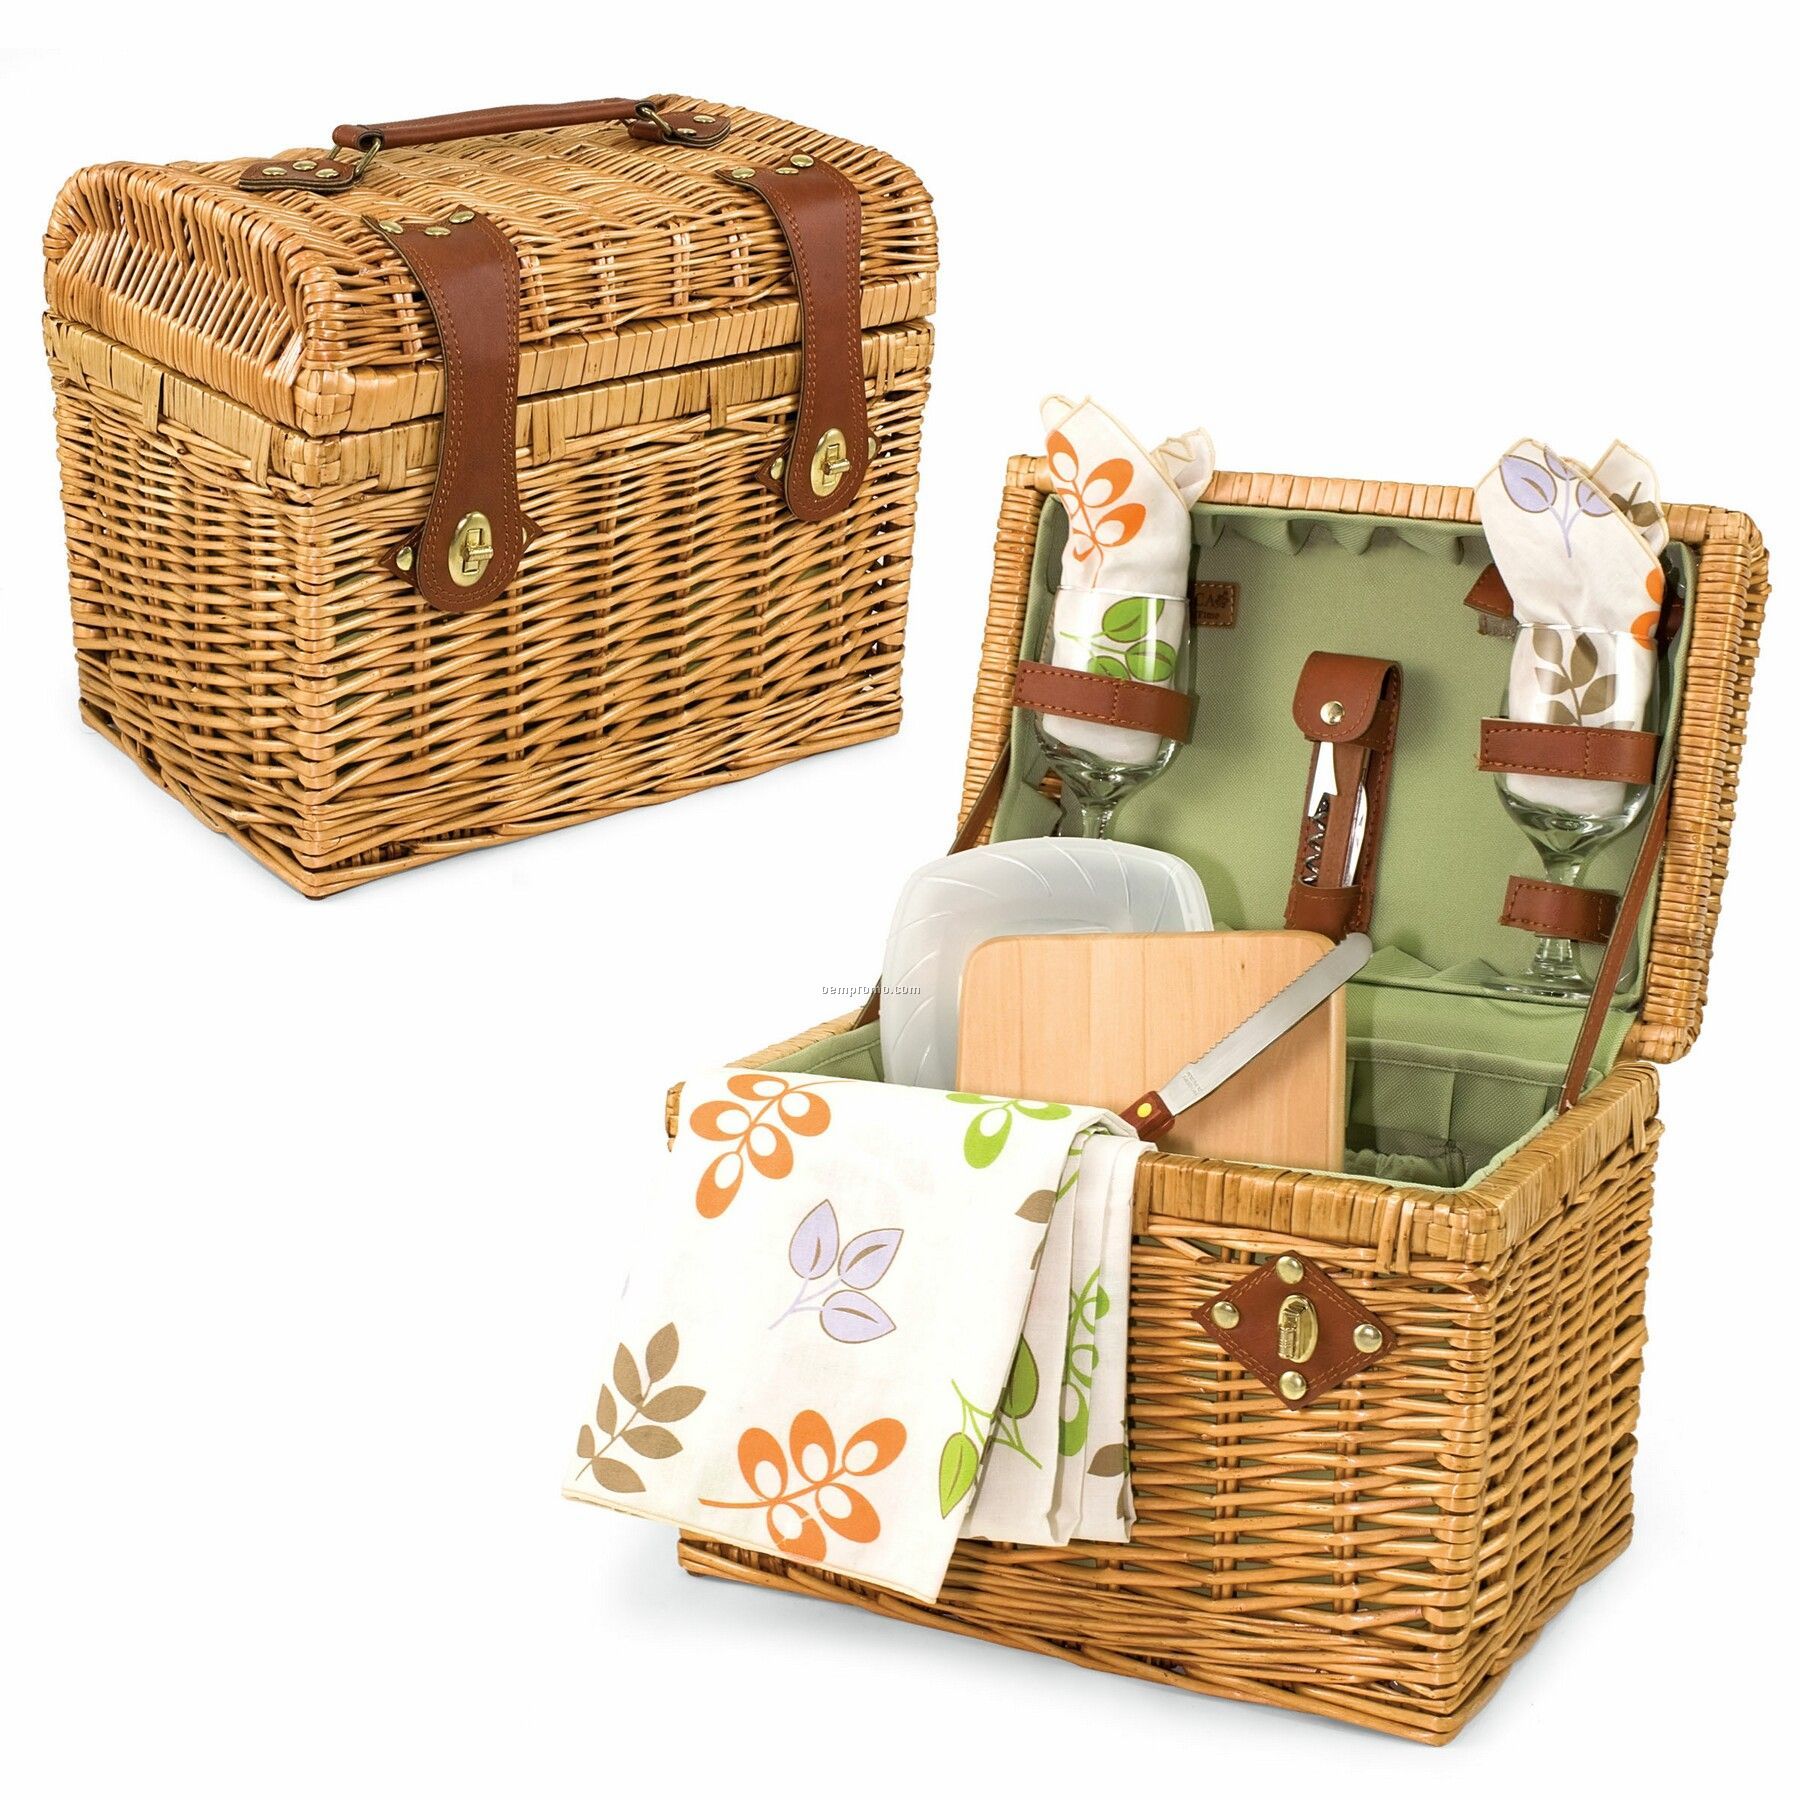 Napa Botanica 12.5" Picnic Basket W/ Wine & Cheese Service For 2 (Floral)